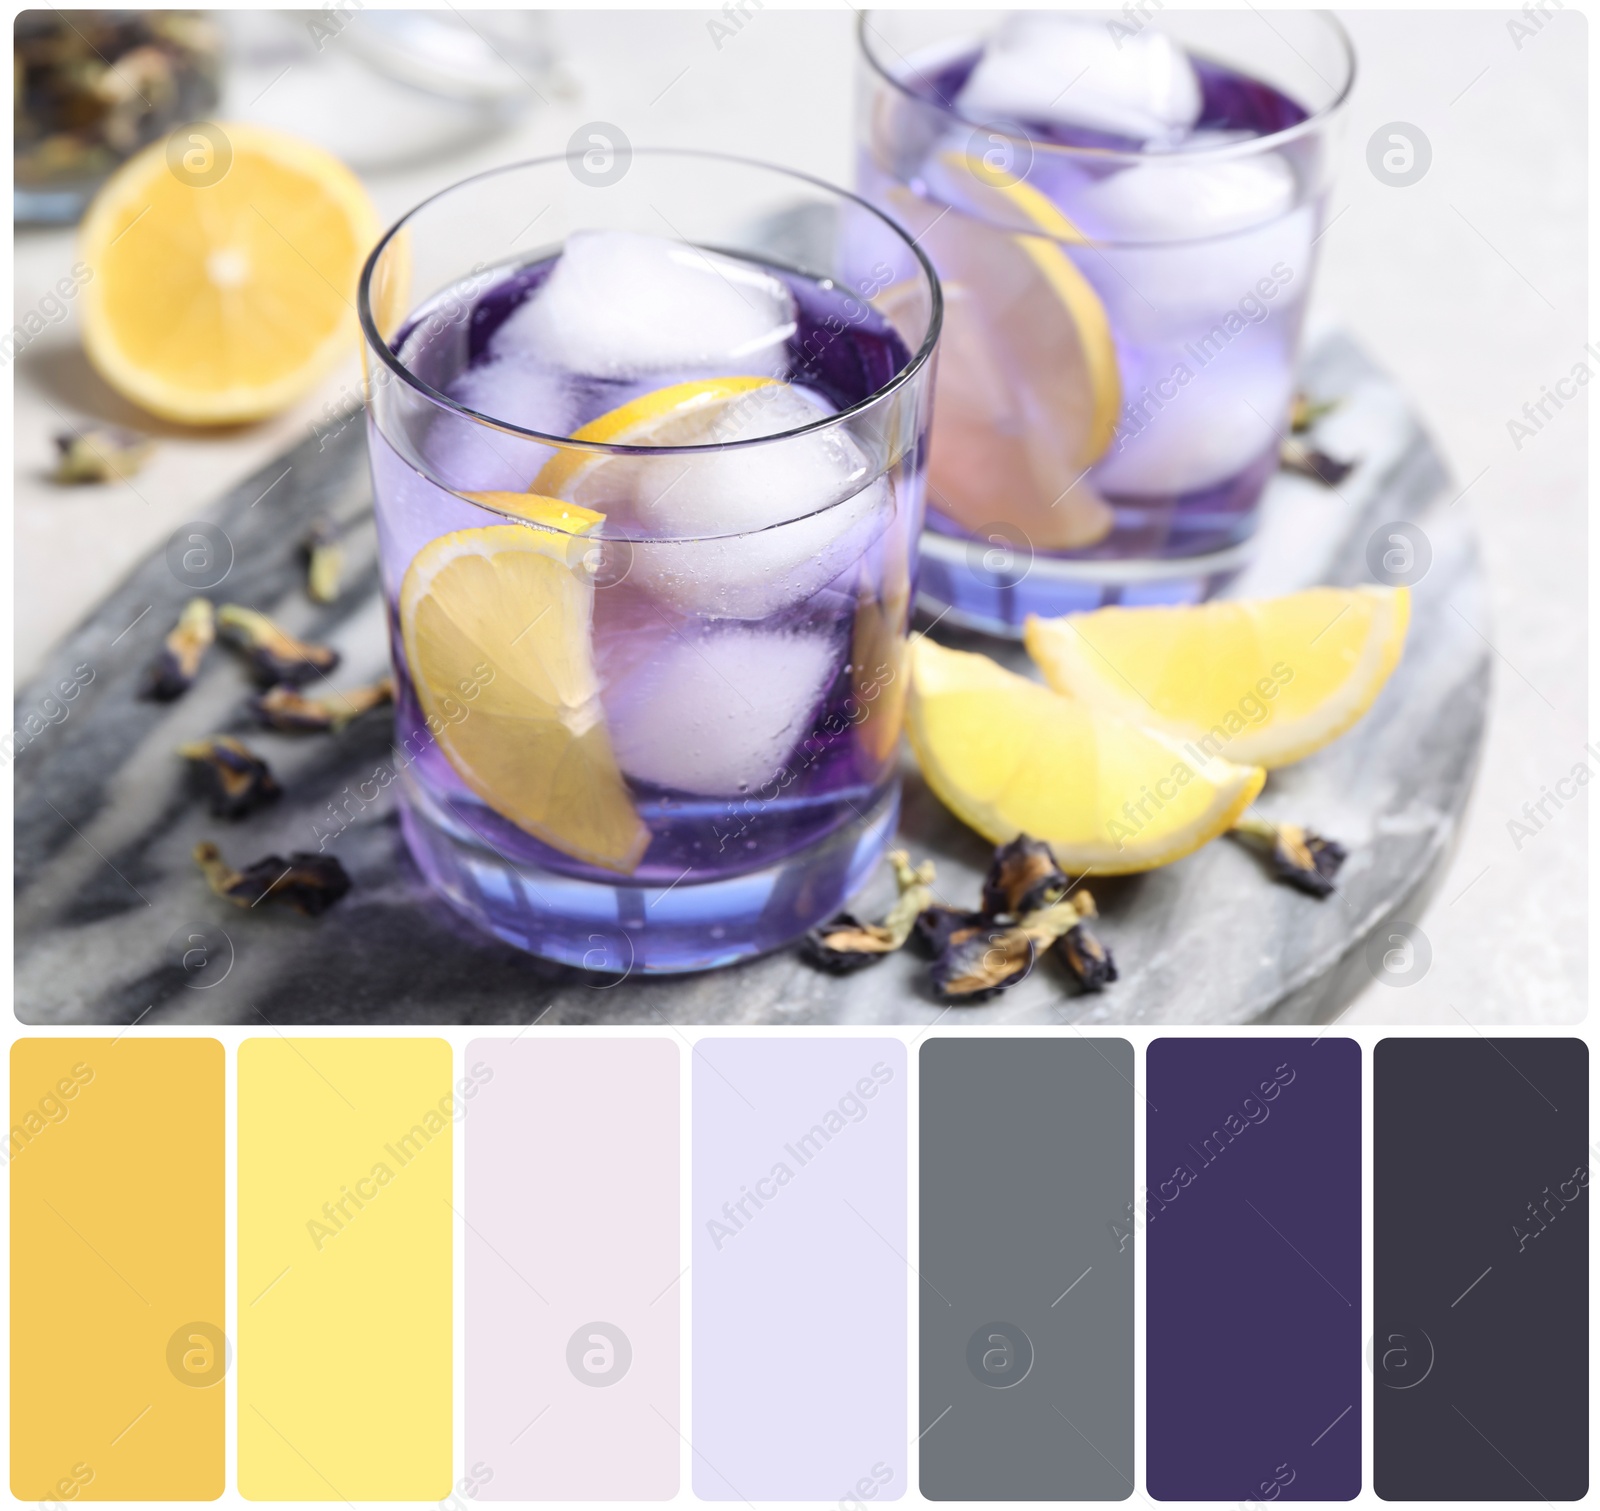 Image of Organic blue Anchan with lemon on table and color palette. Collage